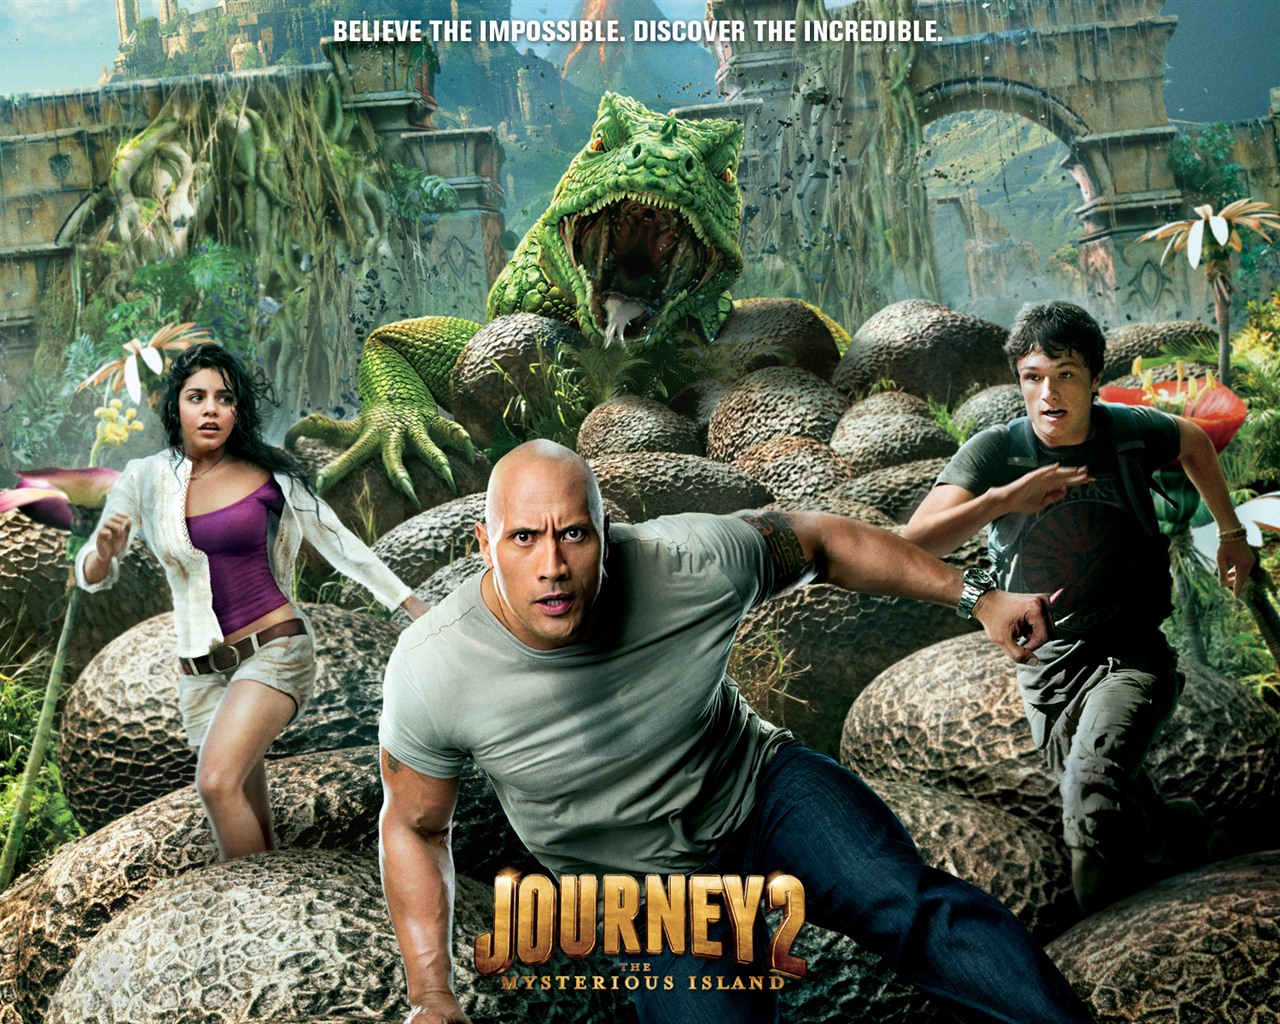 Journey 2: The Mysterious Island HD Wallpaper #1 - 1280x1024